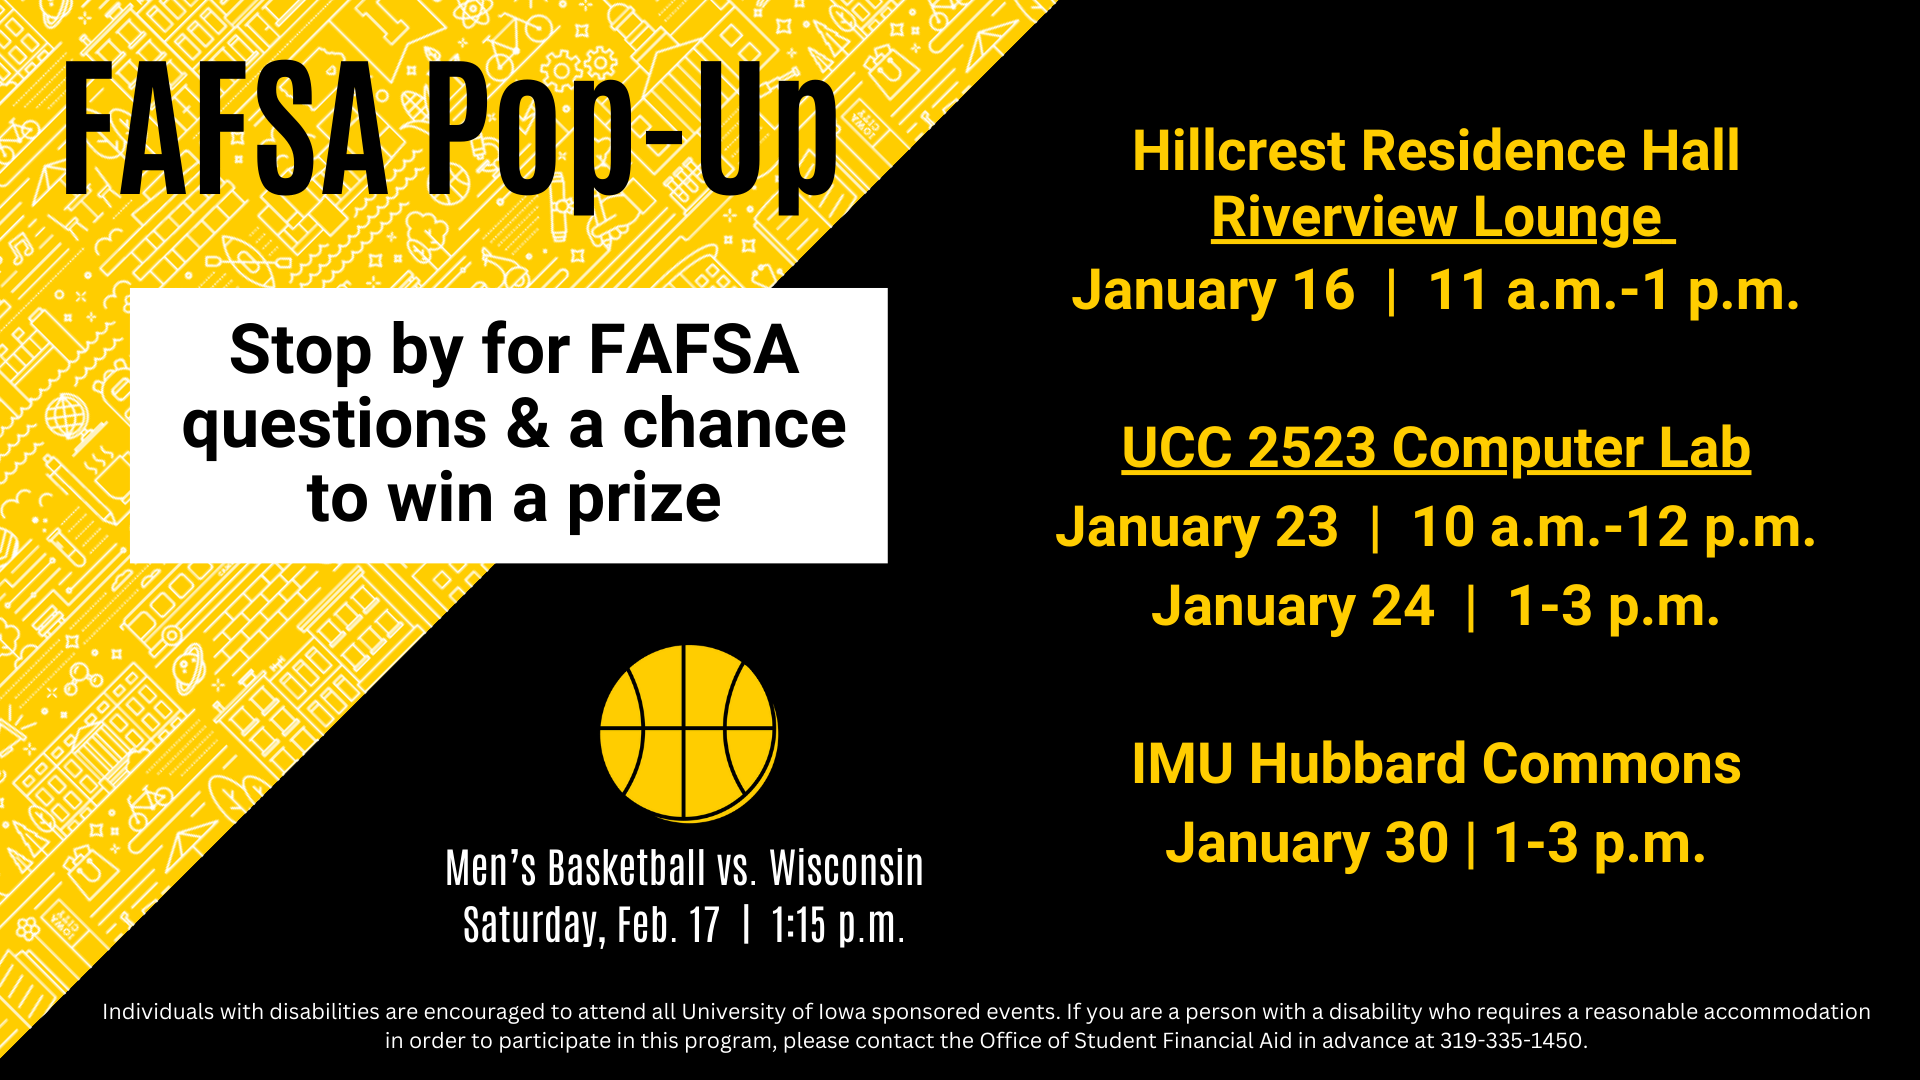 FAFSA Pop-Ups! Stop by for FAFSA questions and a chance to win a prize!